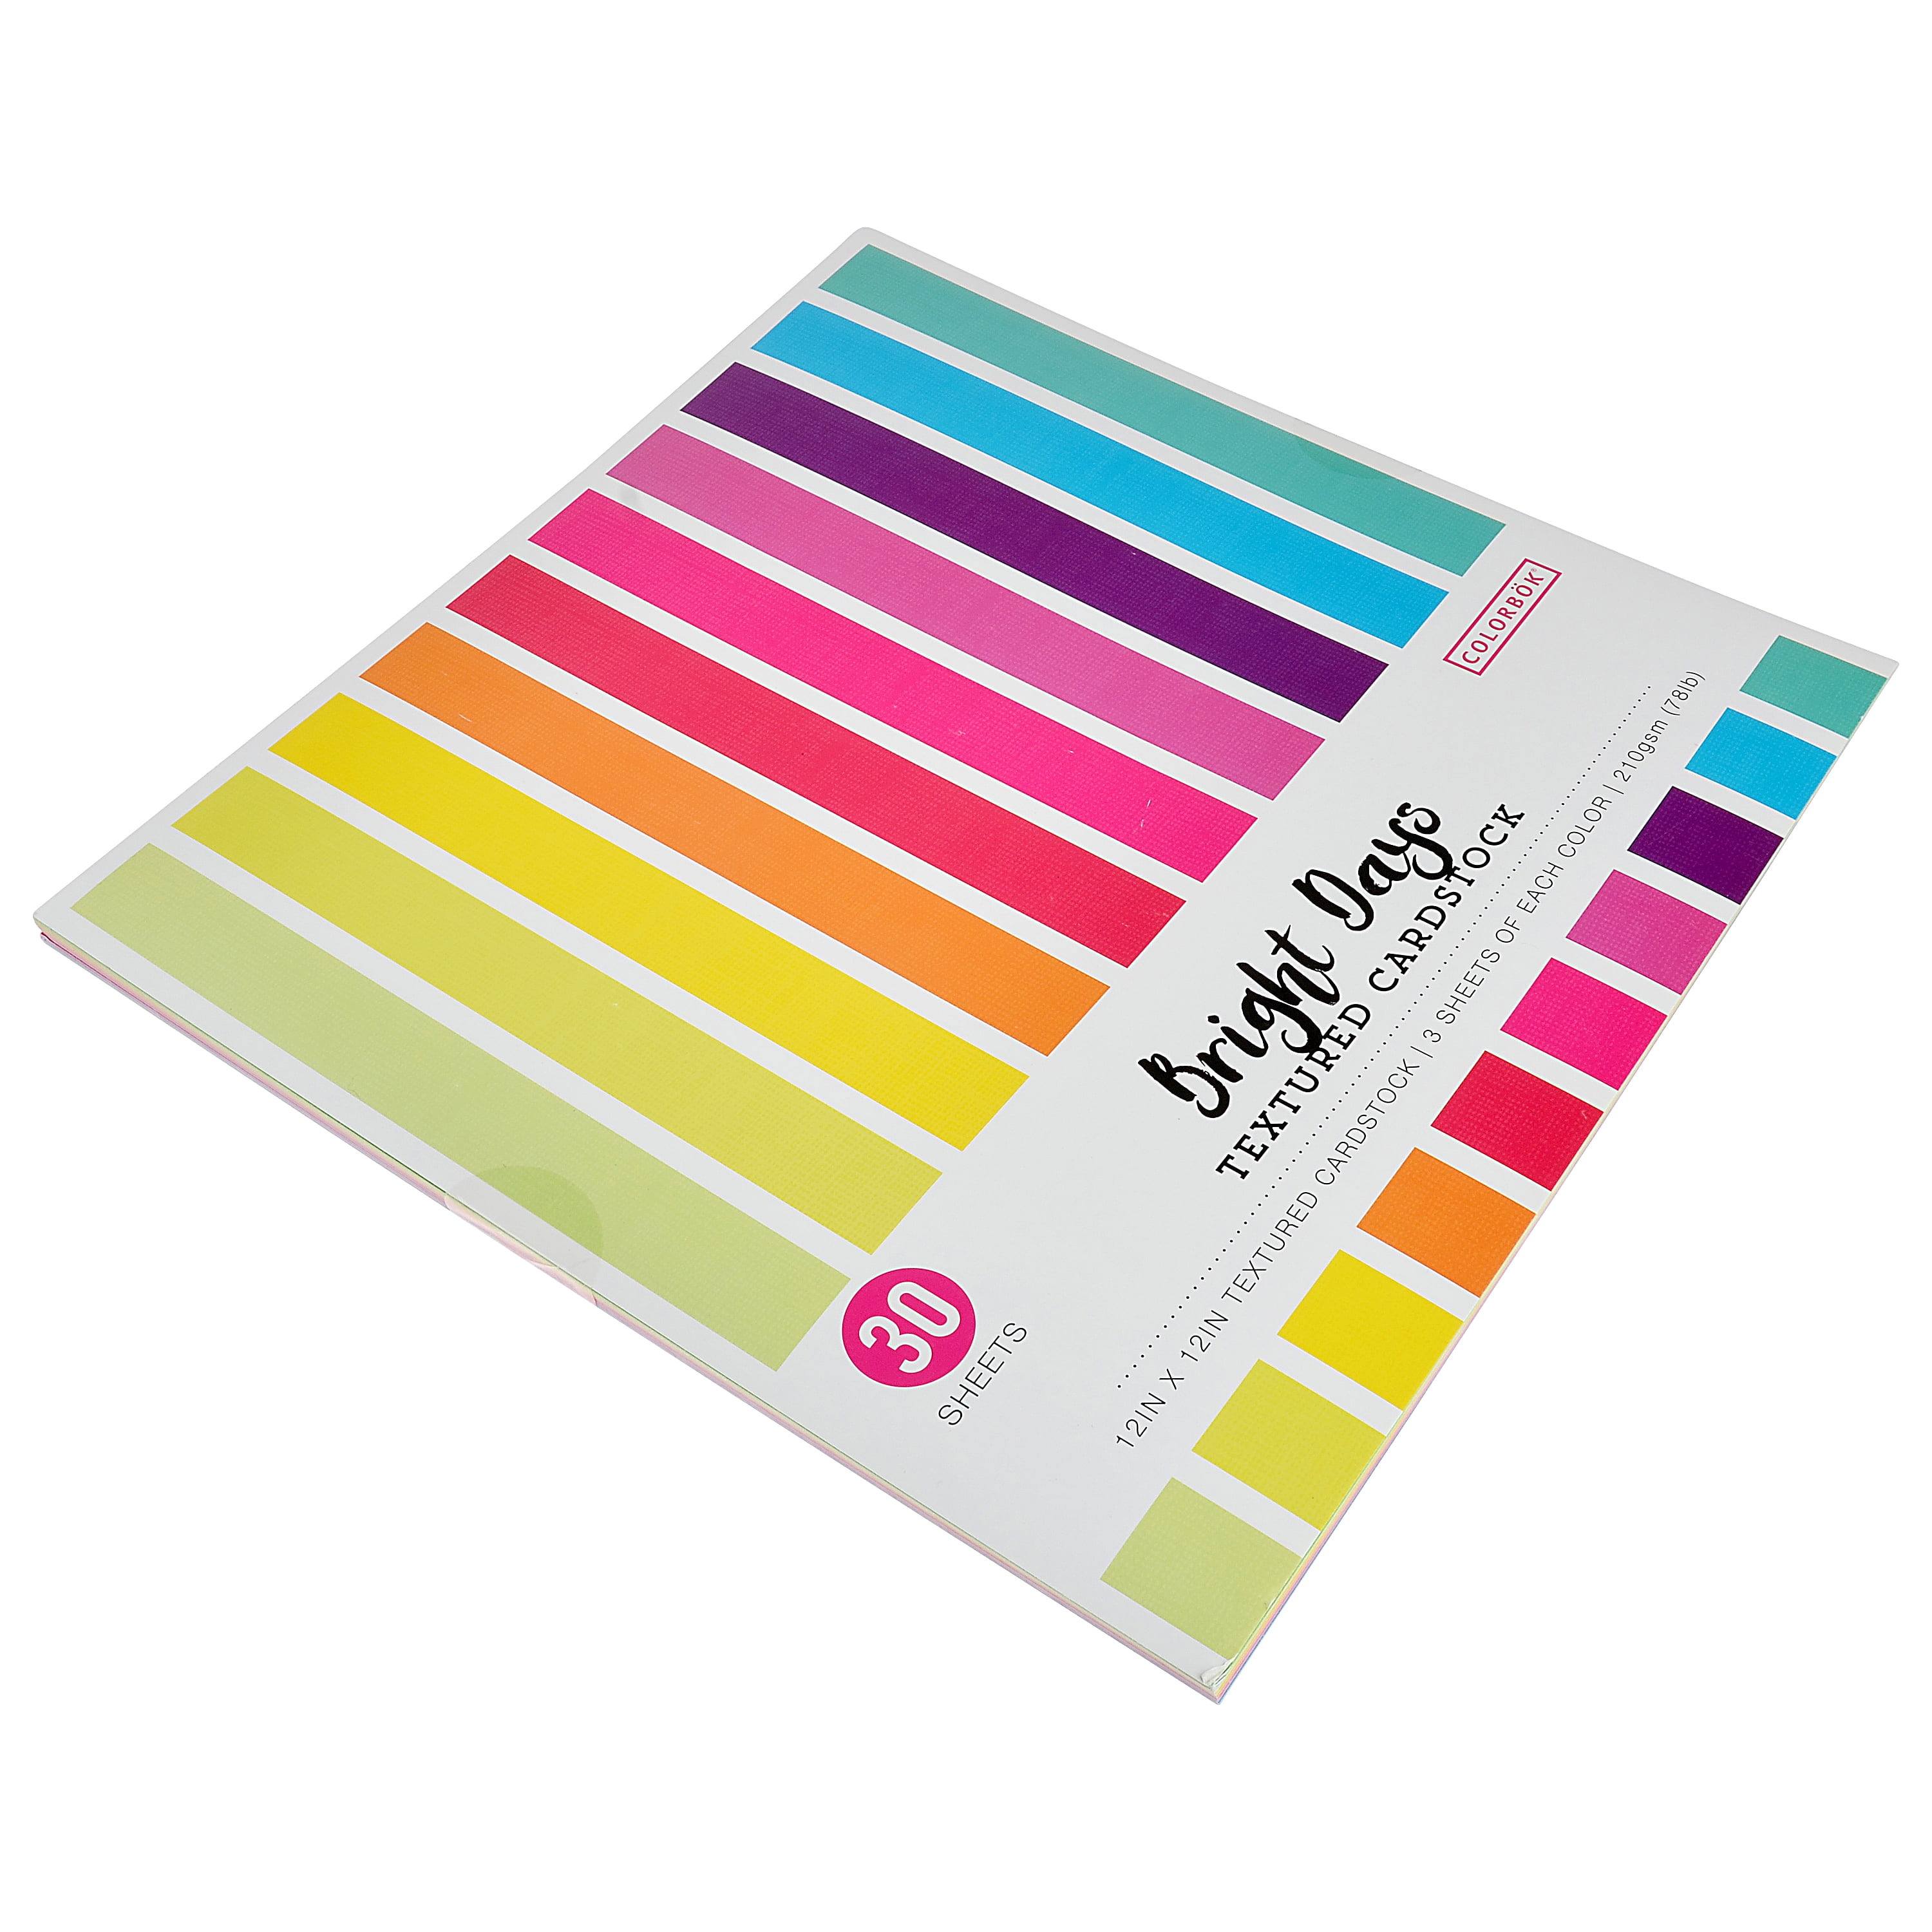 AC Colorbok 6x6 Glitter Cardstock Pad: Primary